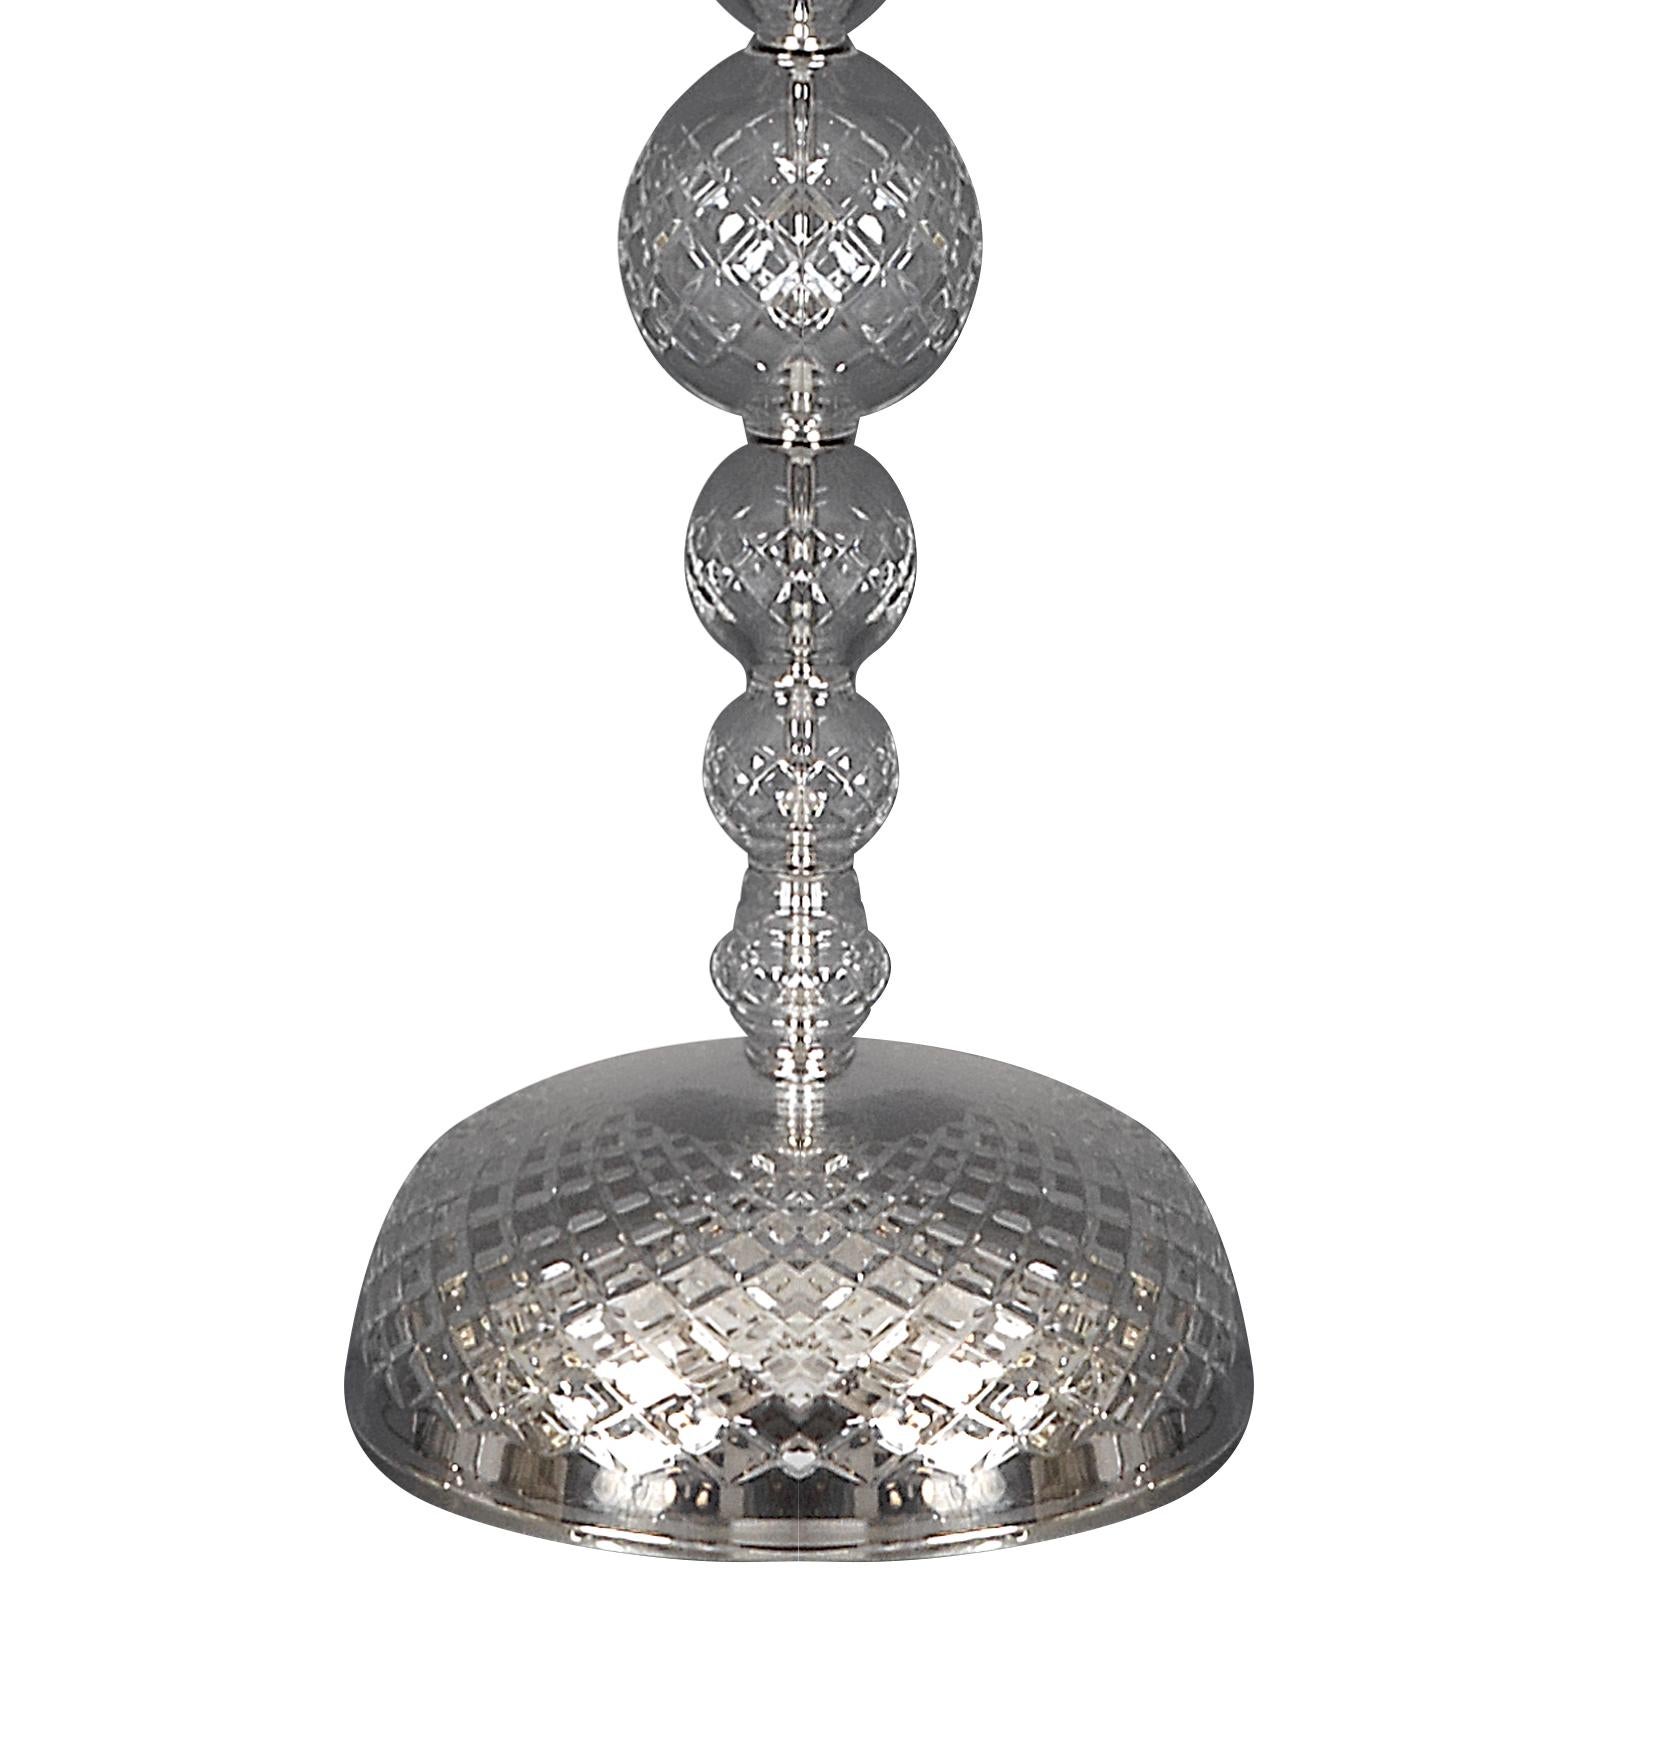 Elaborate and artistic metalwork, with nifty bent brass parts, richly decorated with hand-cut crystal glass, with a column of crystal spheres in several sizes

All components according to the UL regulations, with an additional charge we will